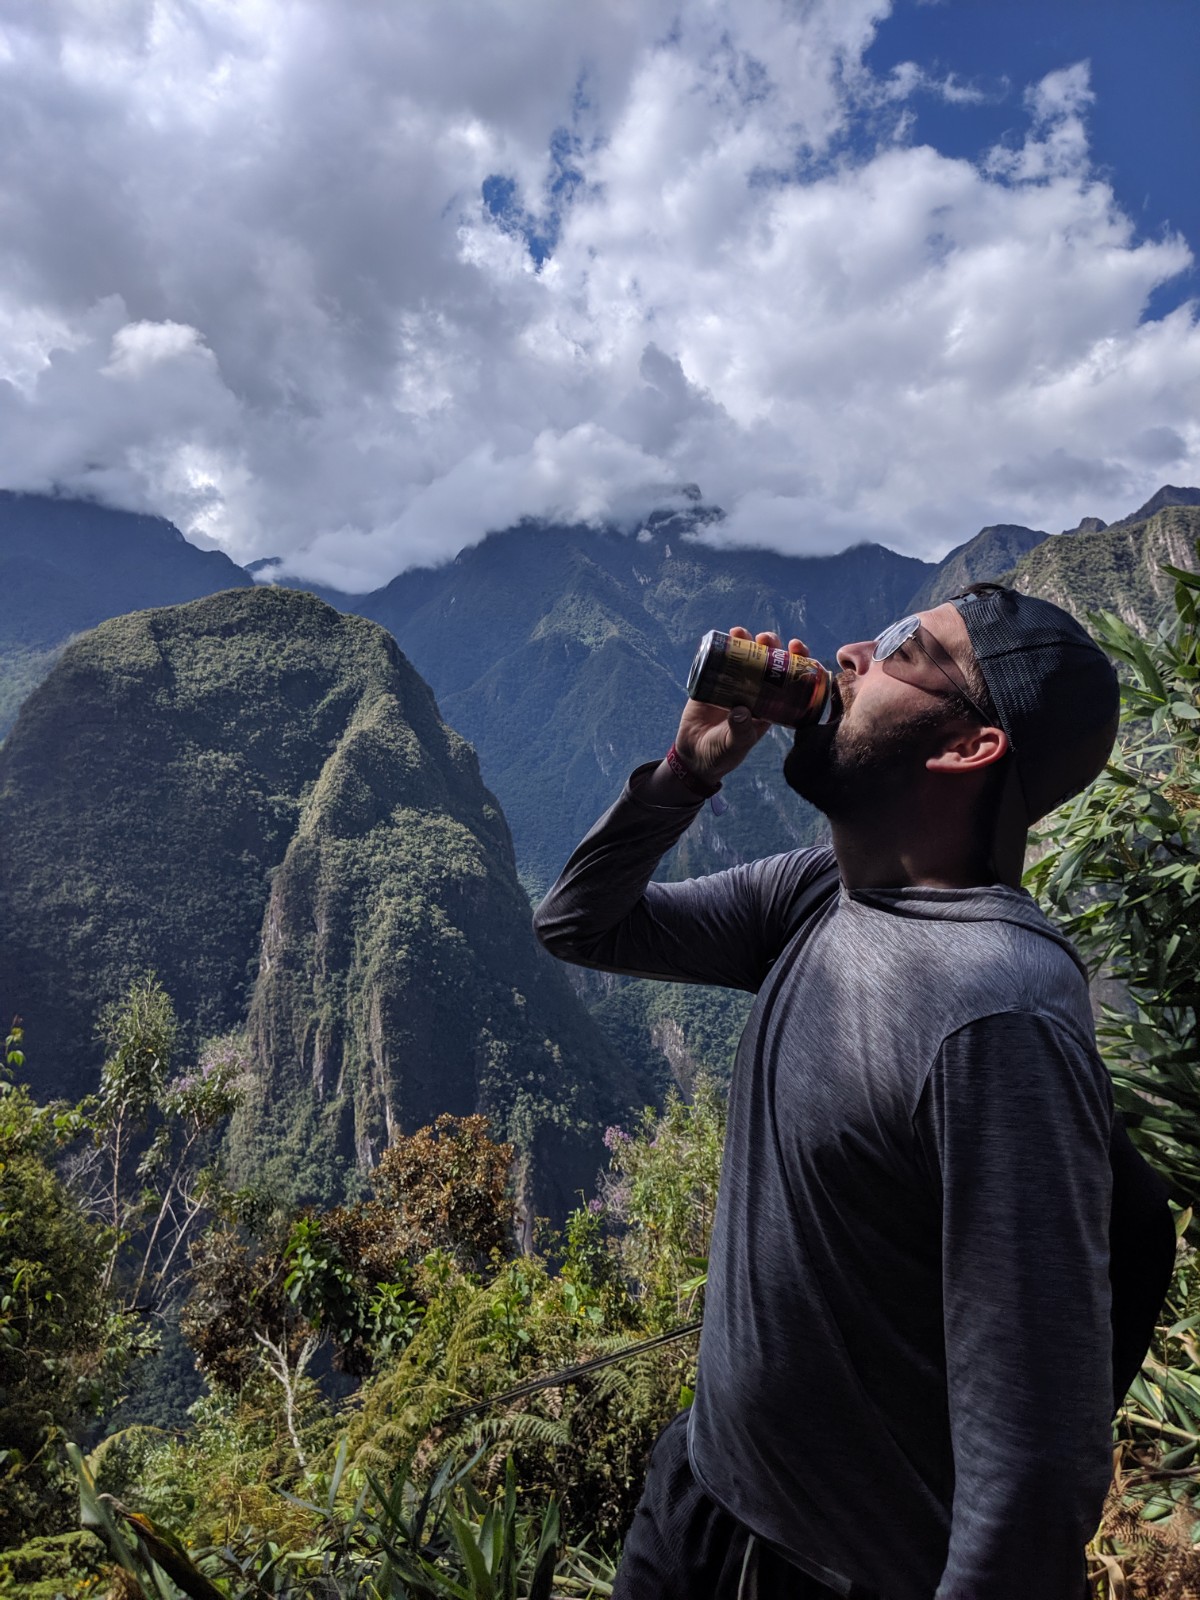 Thanks Mom! Not many can say they bought a beer that I drank right after hiking Machu Picchu (and recycled properly)!